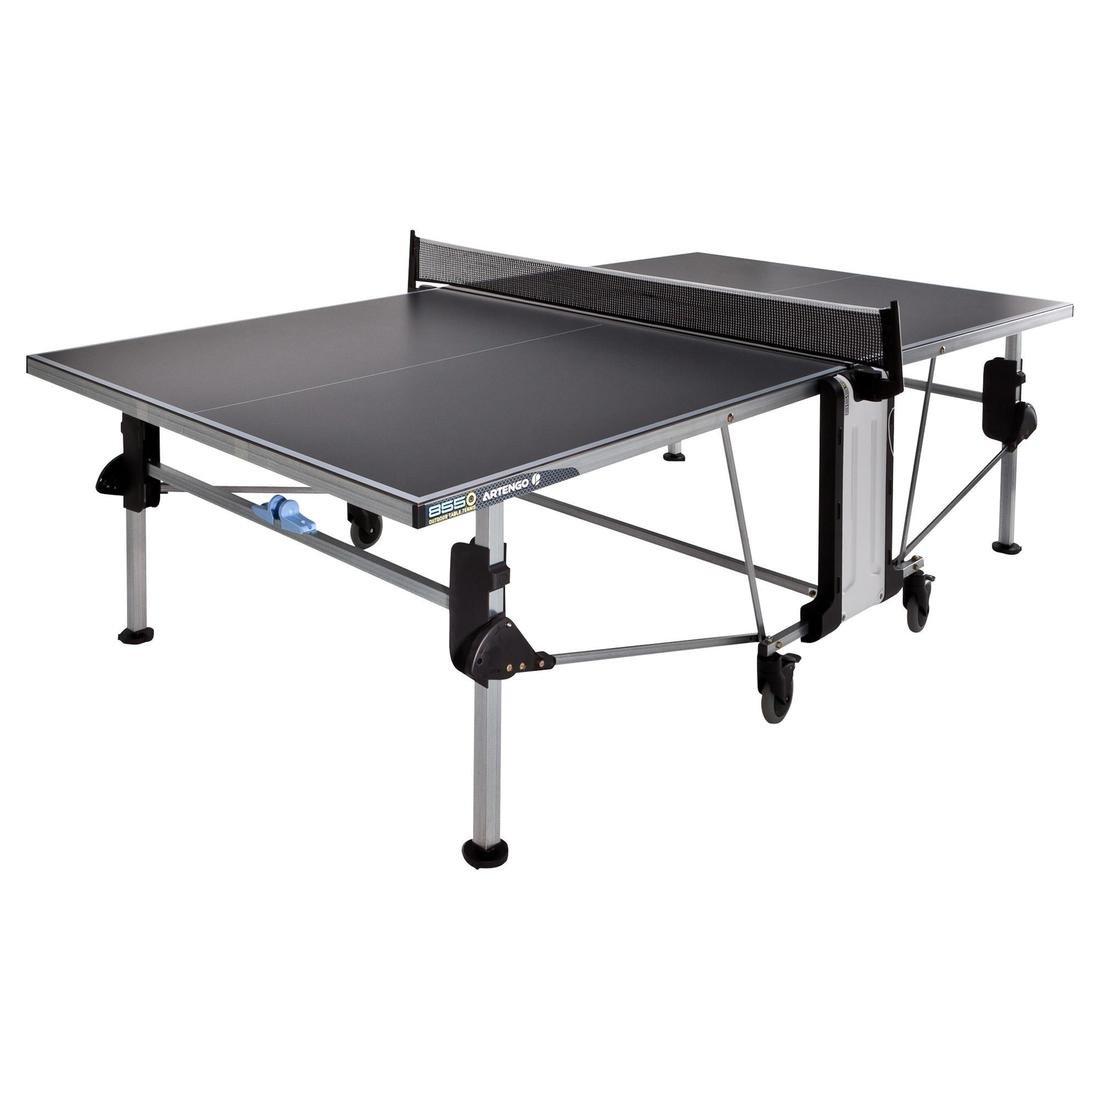 ARTENGO - Posts For Ft855 O And Ft877 O Table Tennis Tables, Black